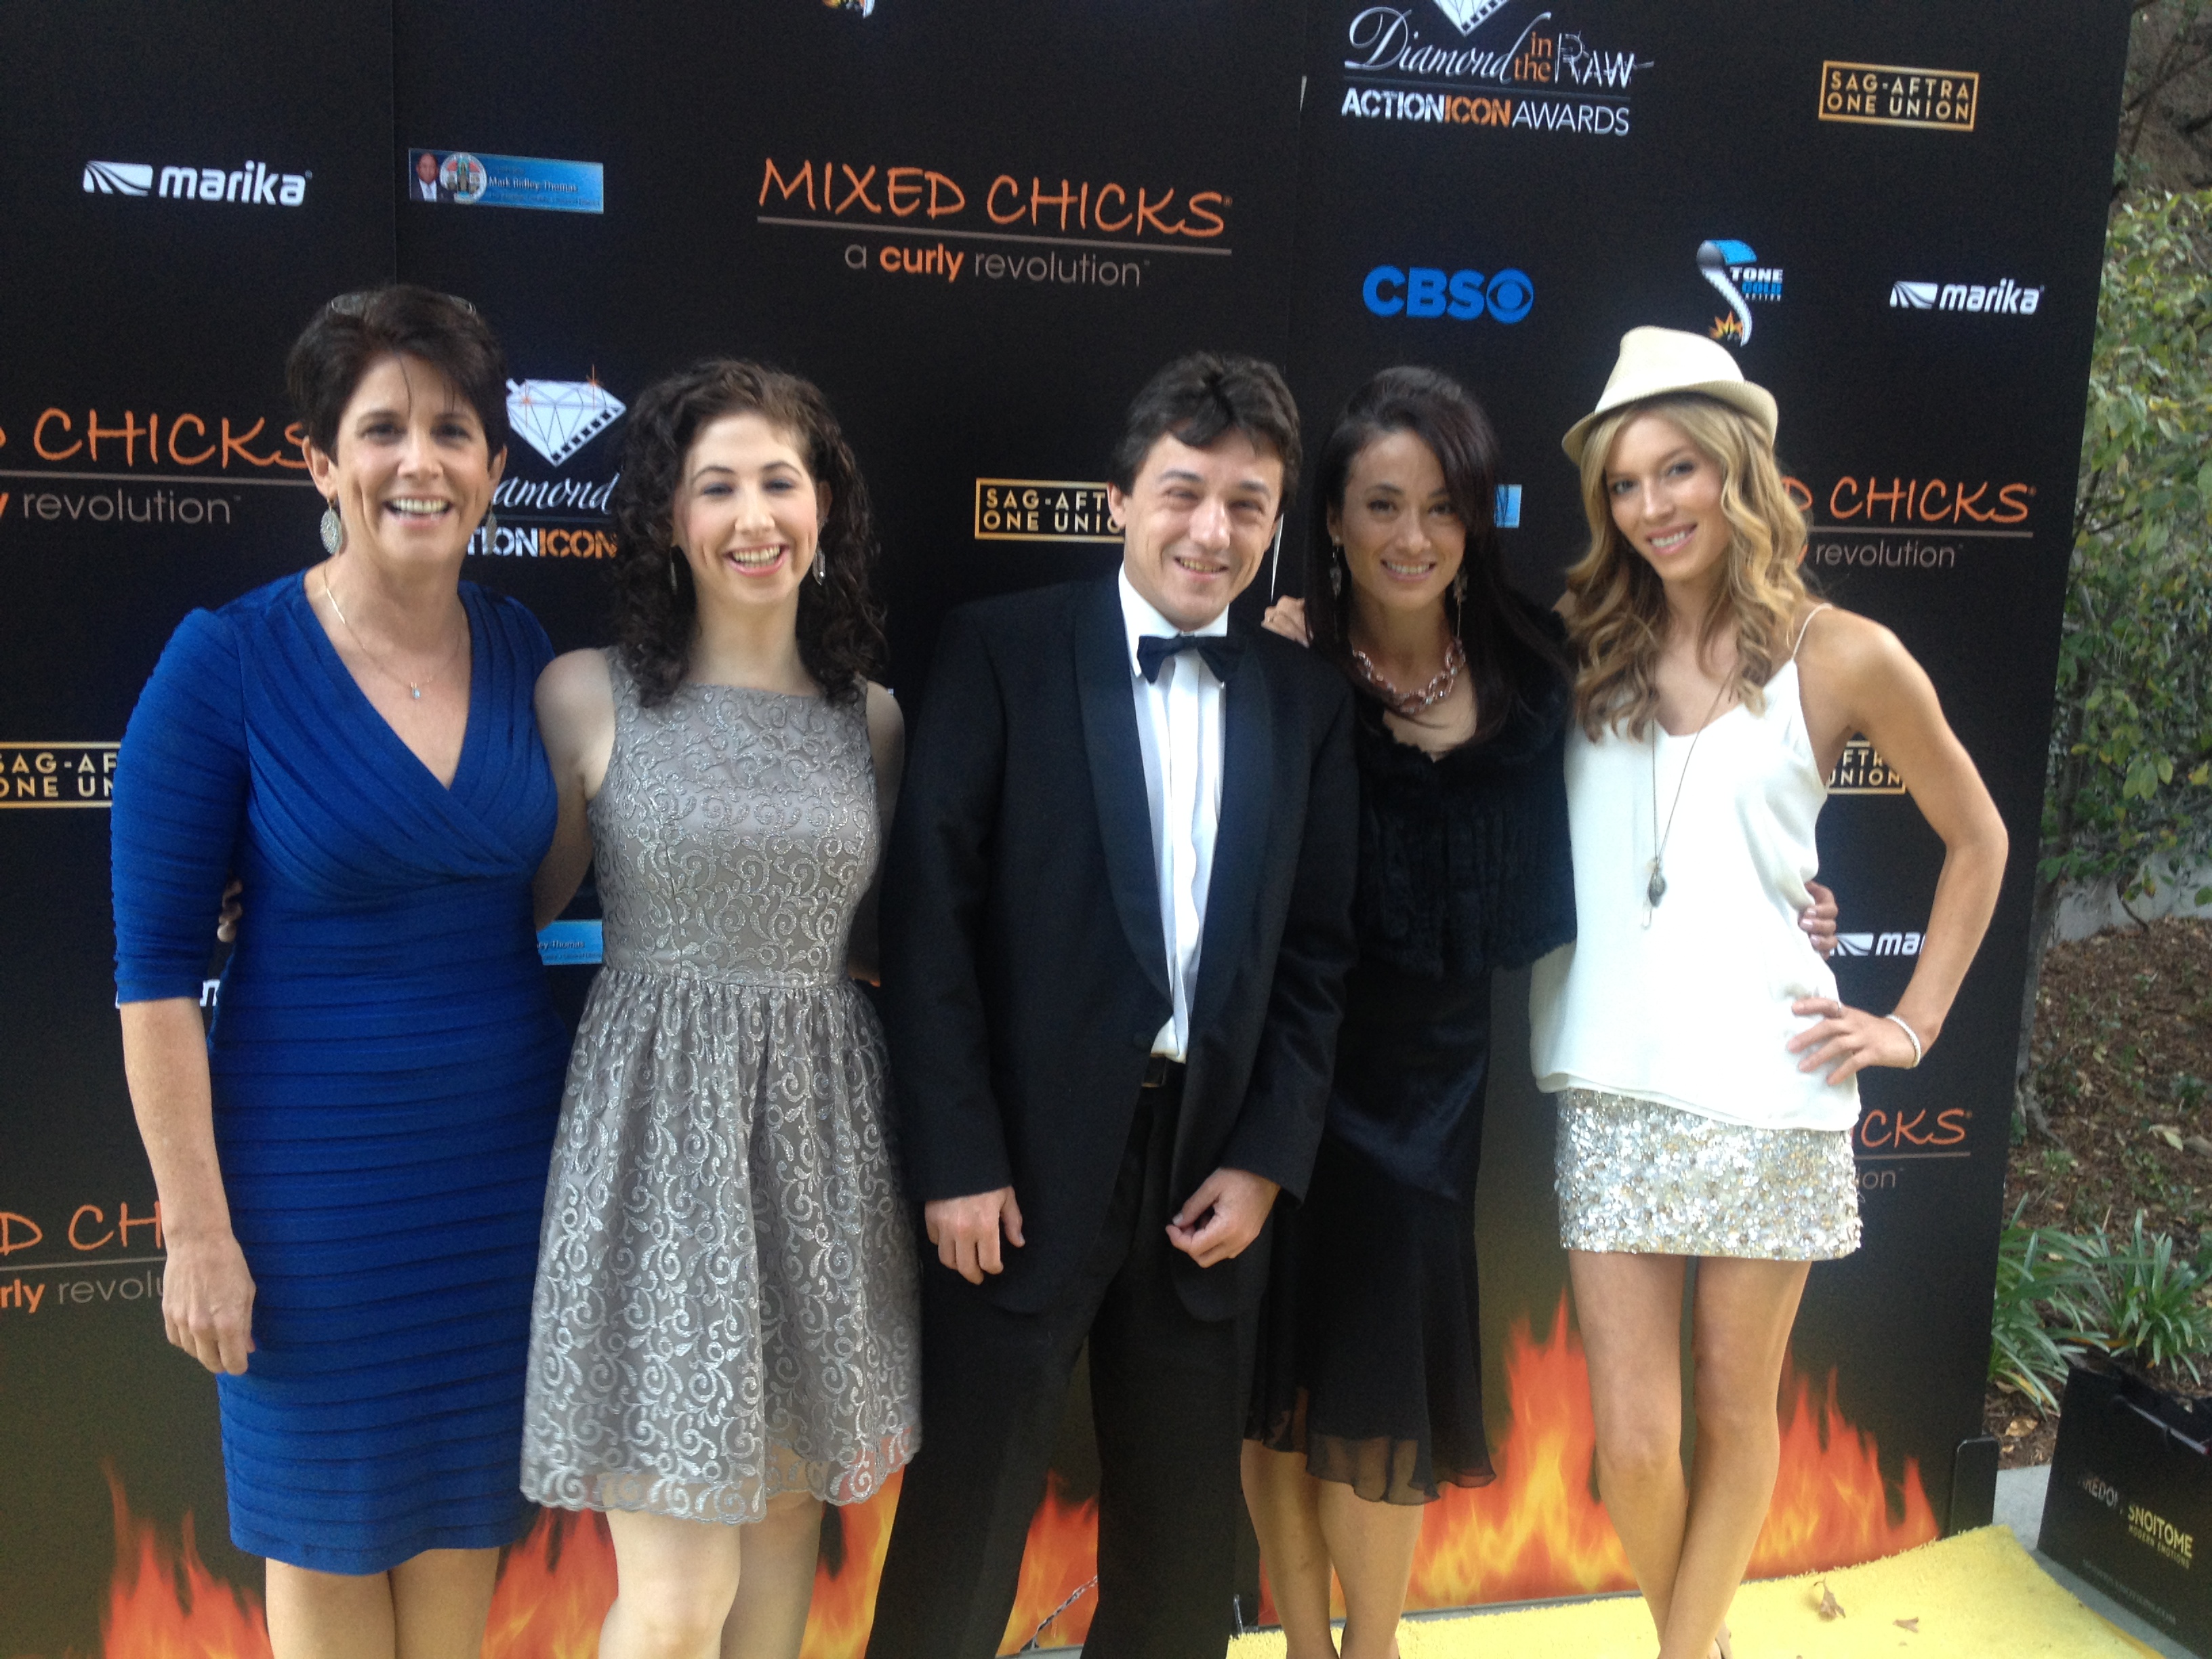 Stephane Guenin with Marian Green, Sara Logan Hofstein Tamiko Brownlee and Alicia Vela Bailey at the 6th Action Icon Awards honoring Marian Green for her iconic stuntwoman career